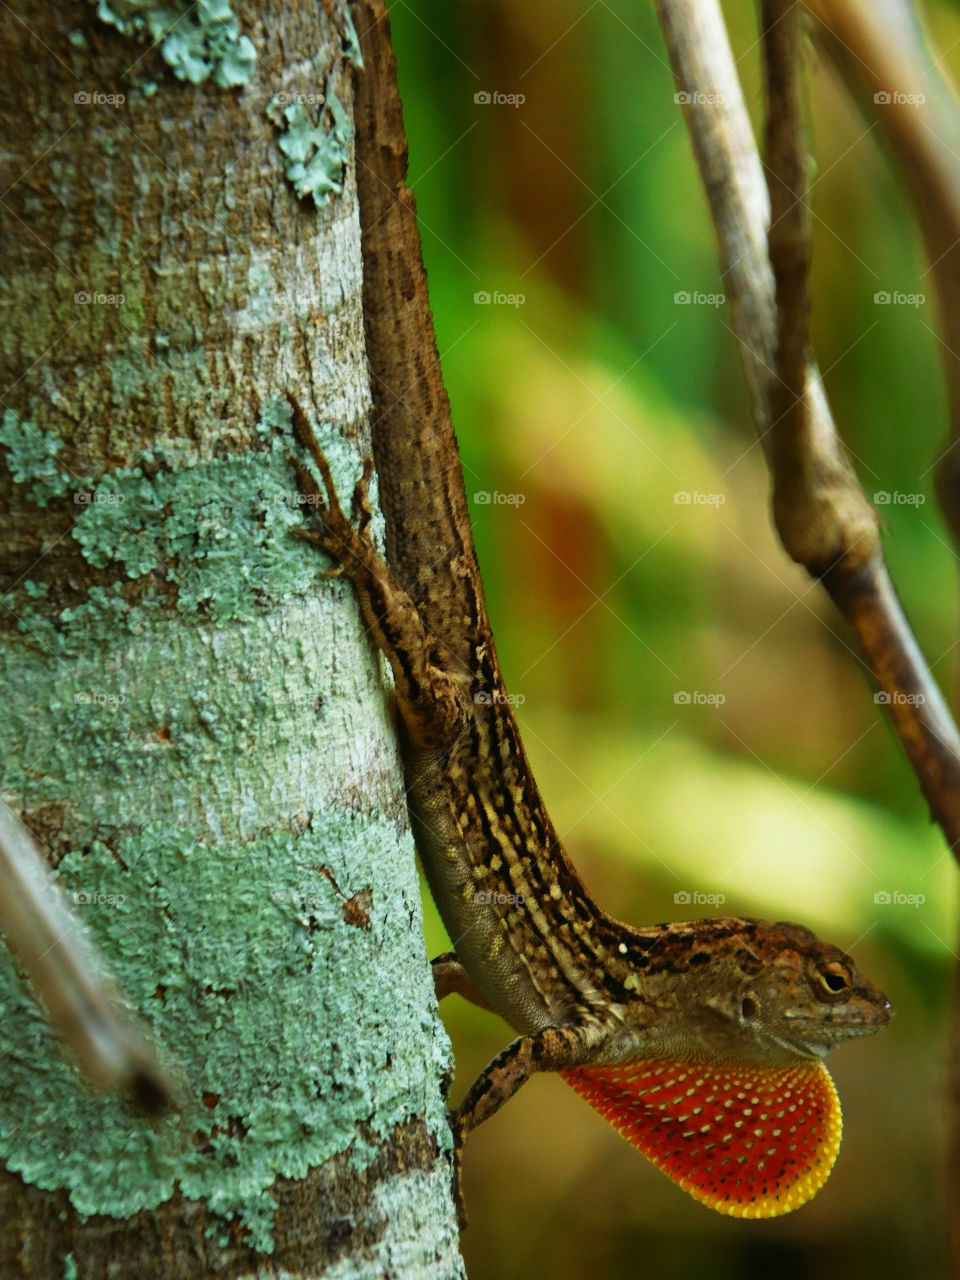 Lizard on a tree during mating season. Notice the ruby red swollen throat! 